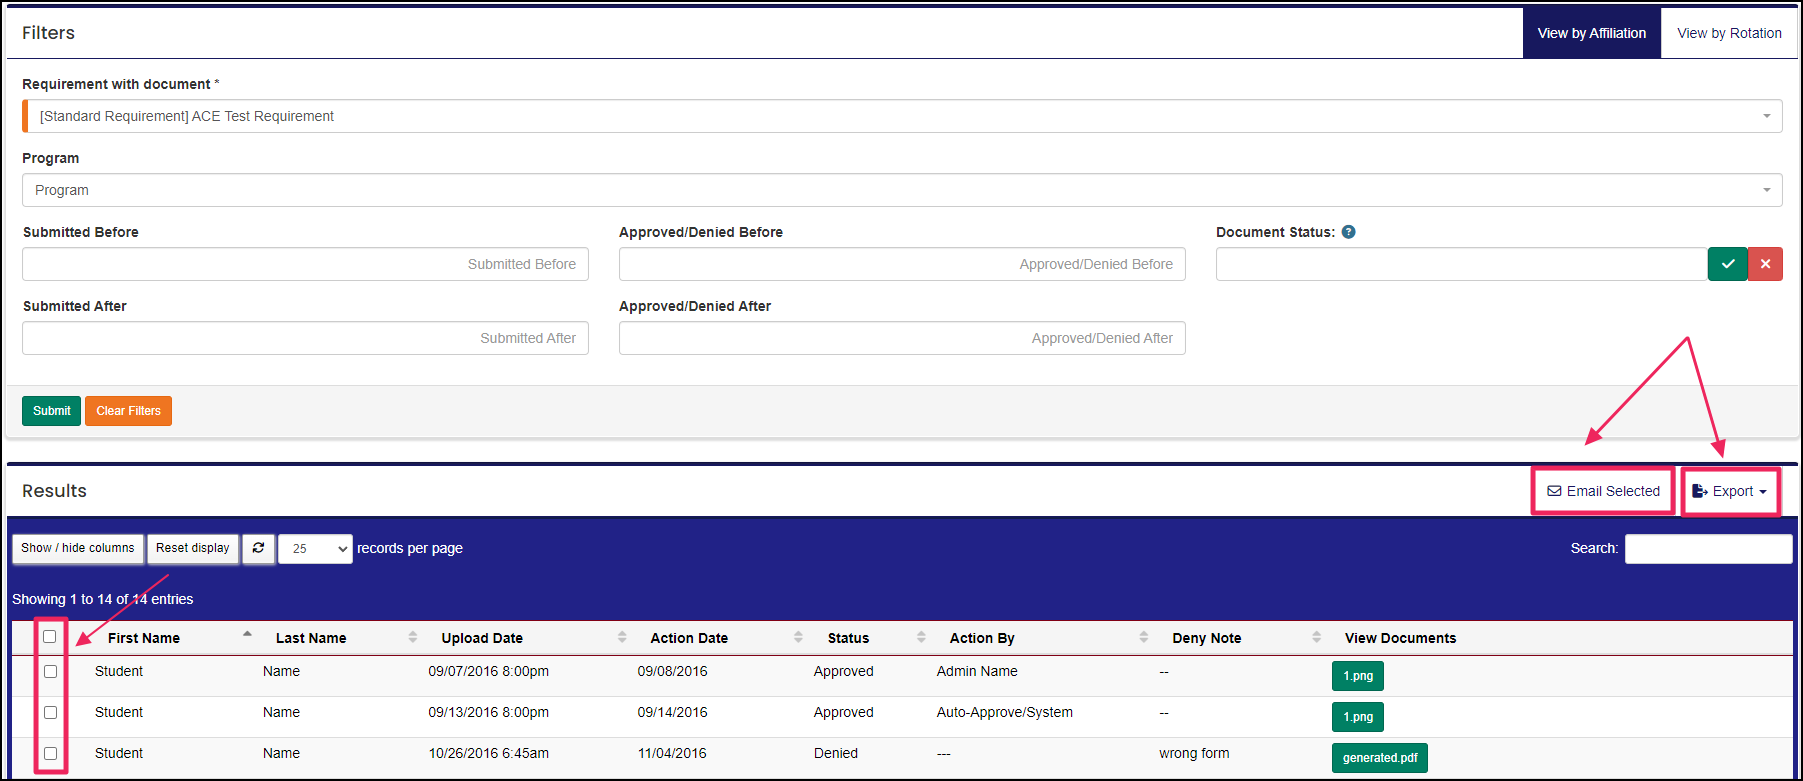 Image shows document status report highlighting email selected and export dropdown.